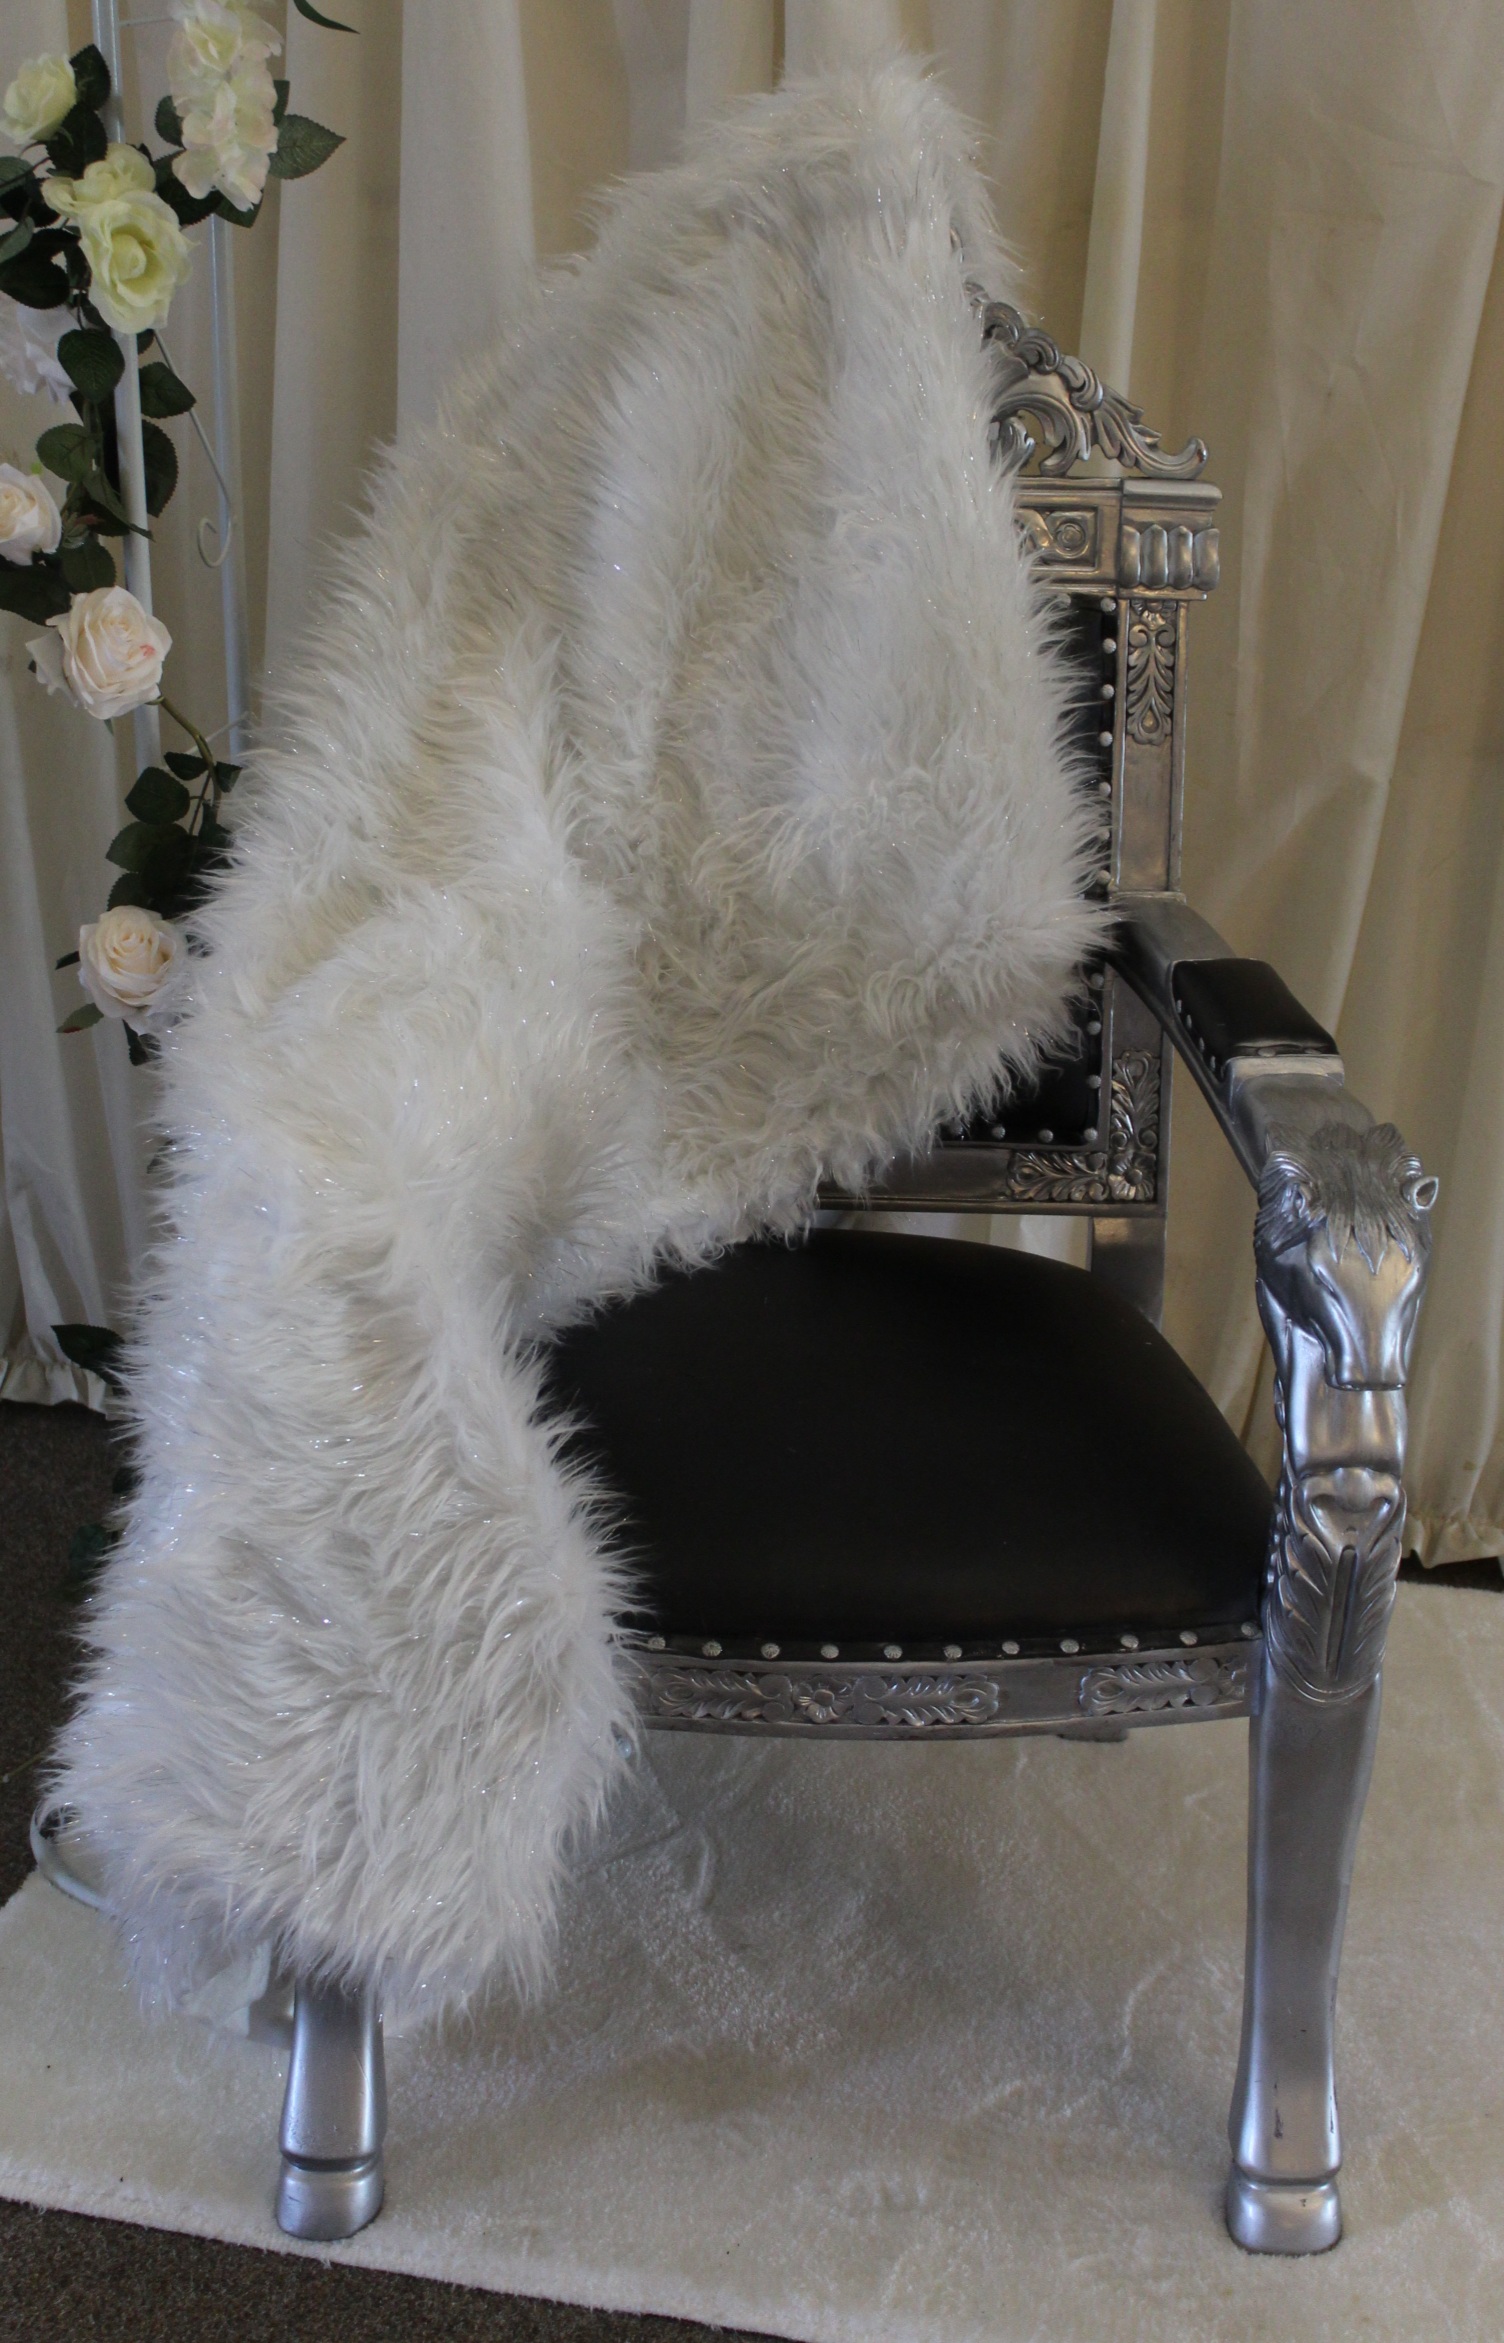 Throne chair for winter wonderland wedding covered in fur rug